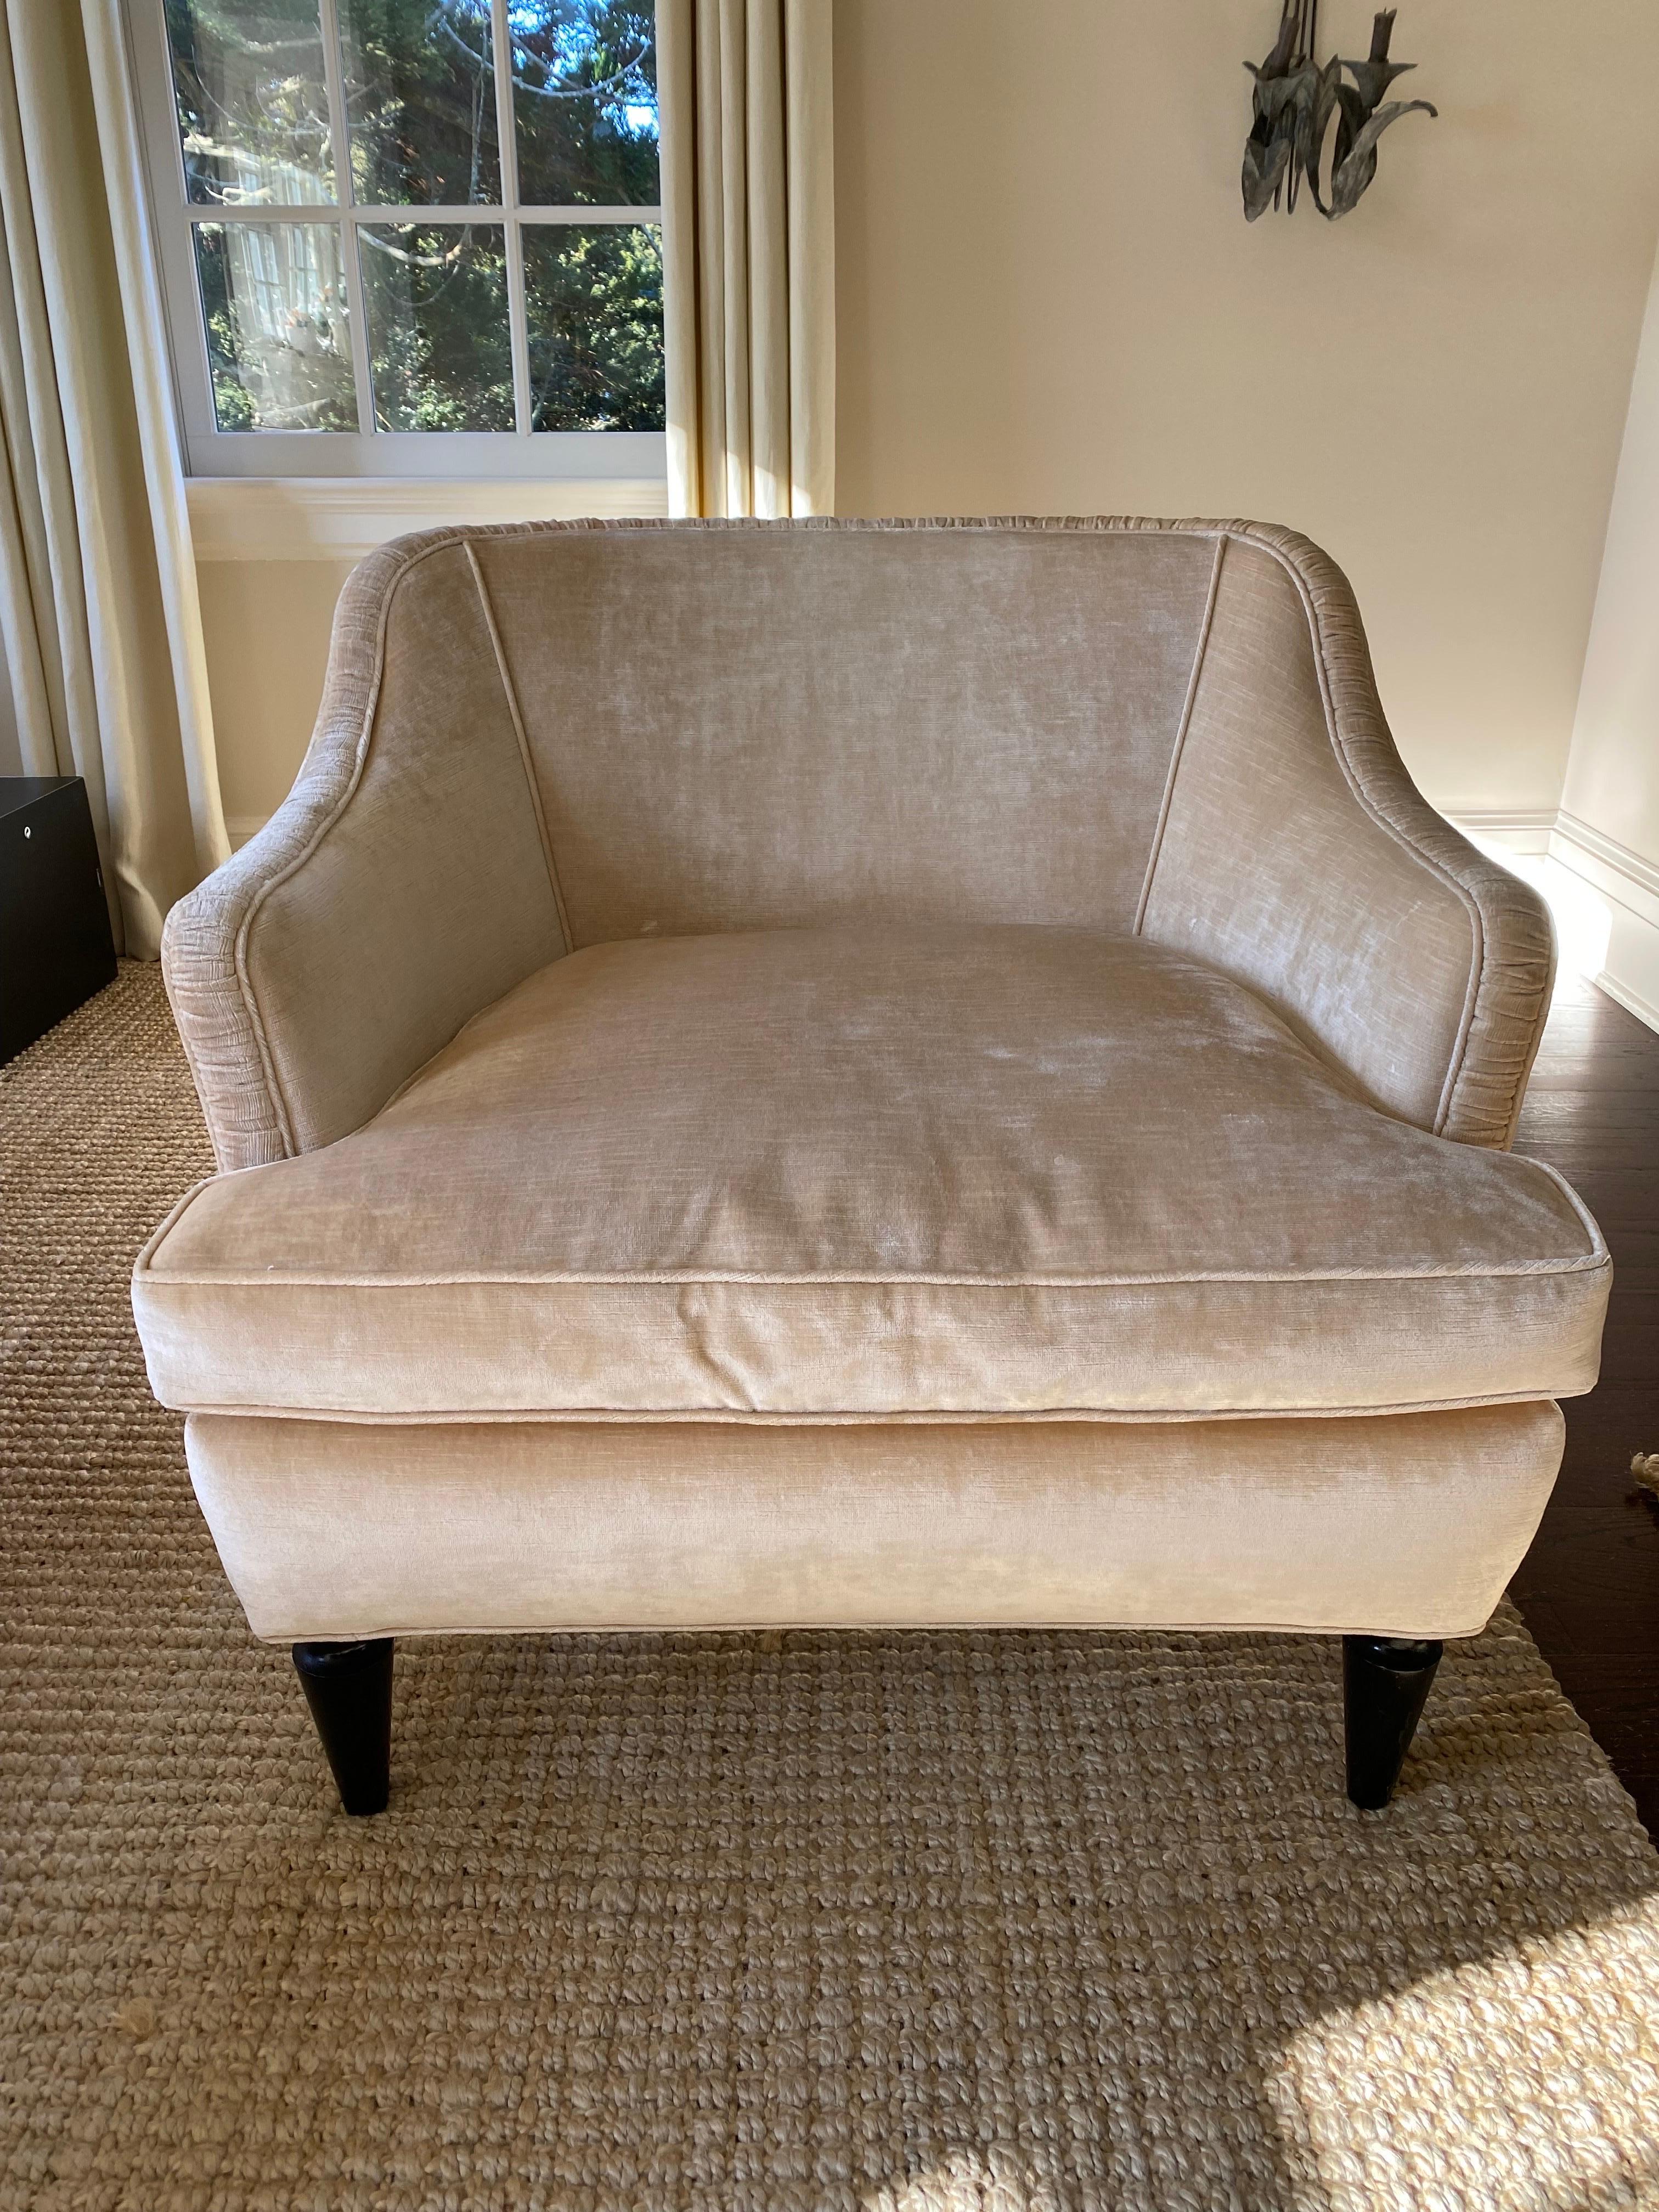 Mid-Century Style Velvet Upholstered Armchair with Black Painted Legs.
A low profile club chair with interesting lines and details. Upholstered in an eggshell cream velvet with ruched flat banding along the top of each arm and seat back. Interesting